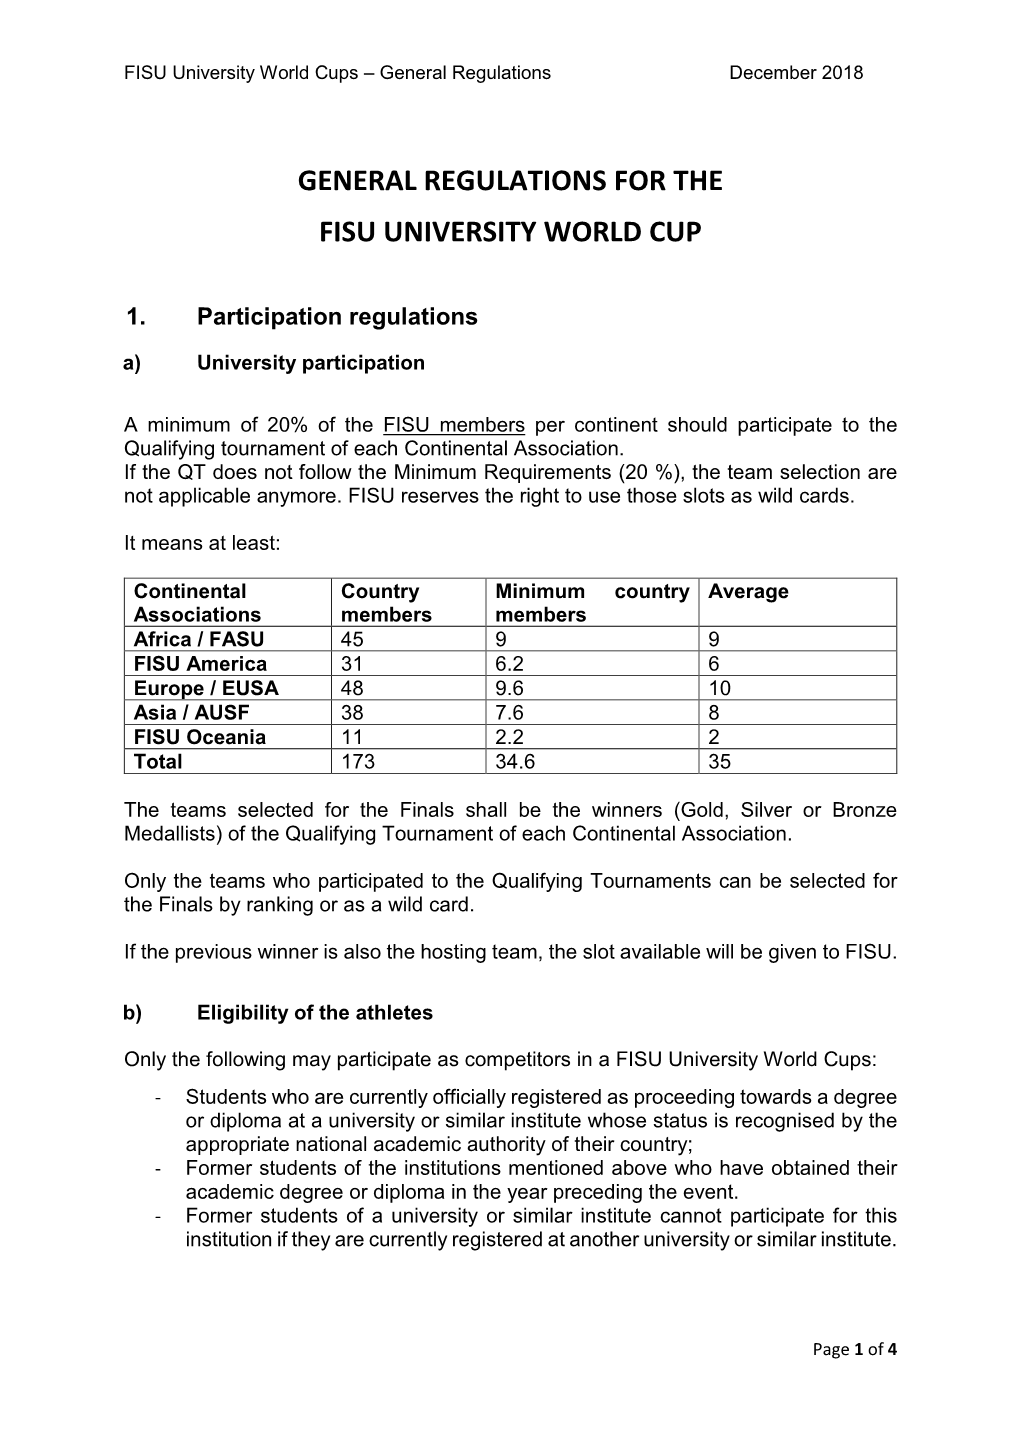 General Regulations for the Fisu University World Cup